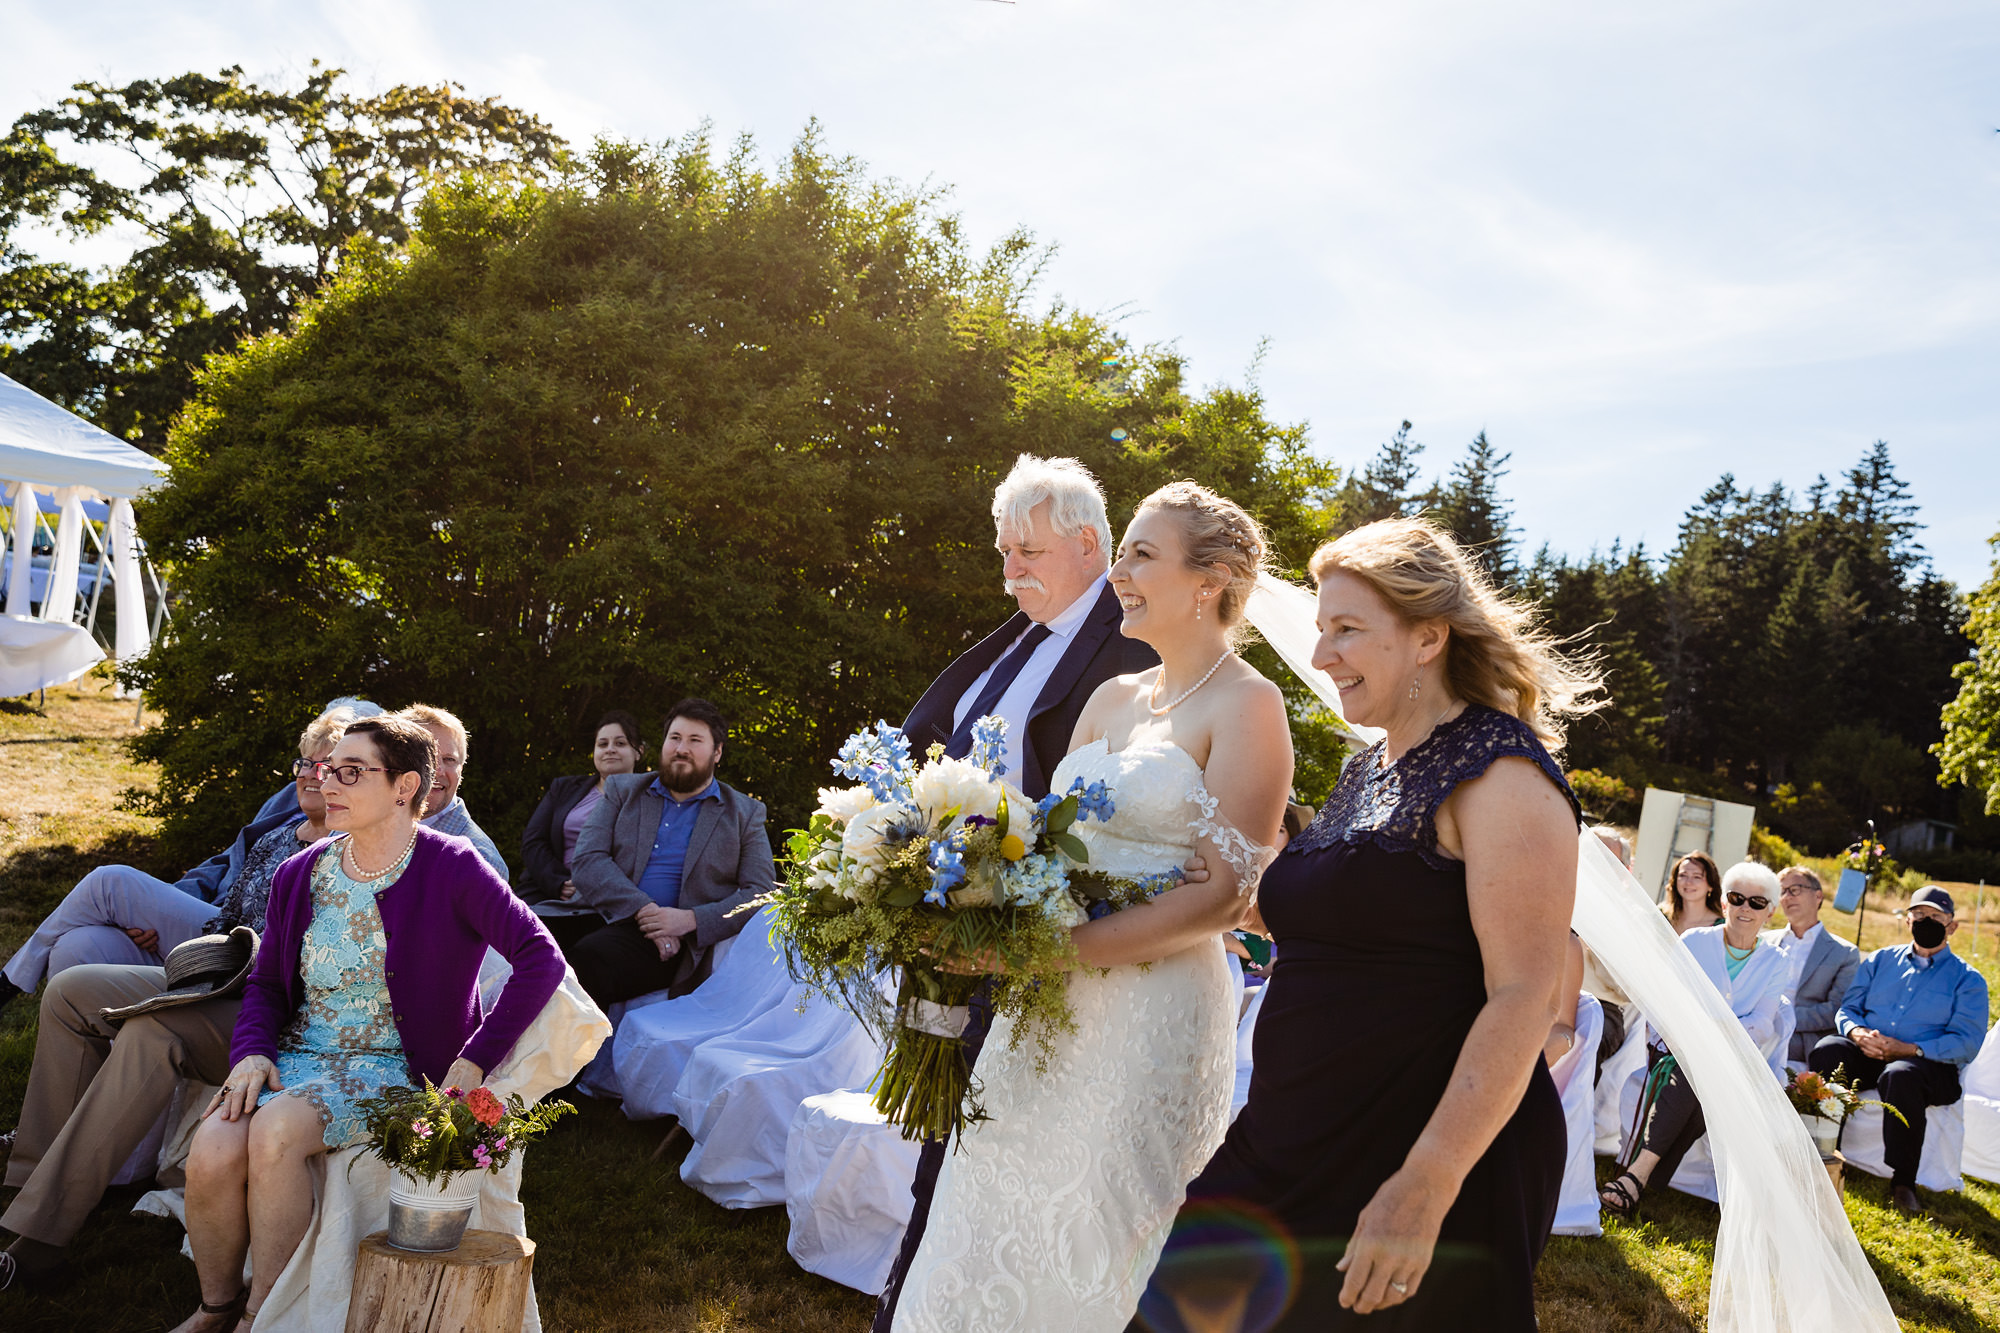 A beautiful wedding ceremony at a private residence on Swans Island, Maine